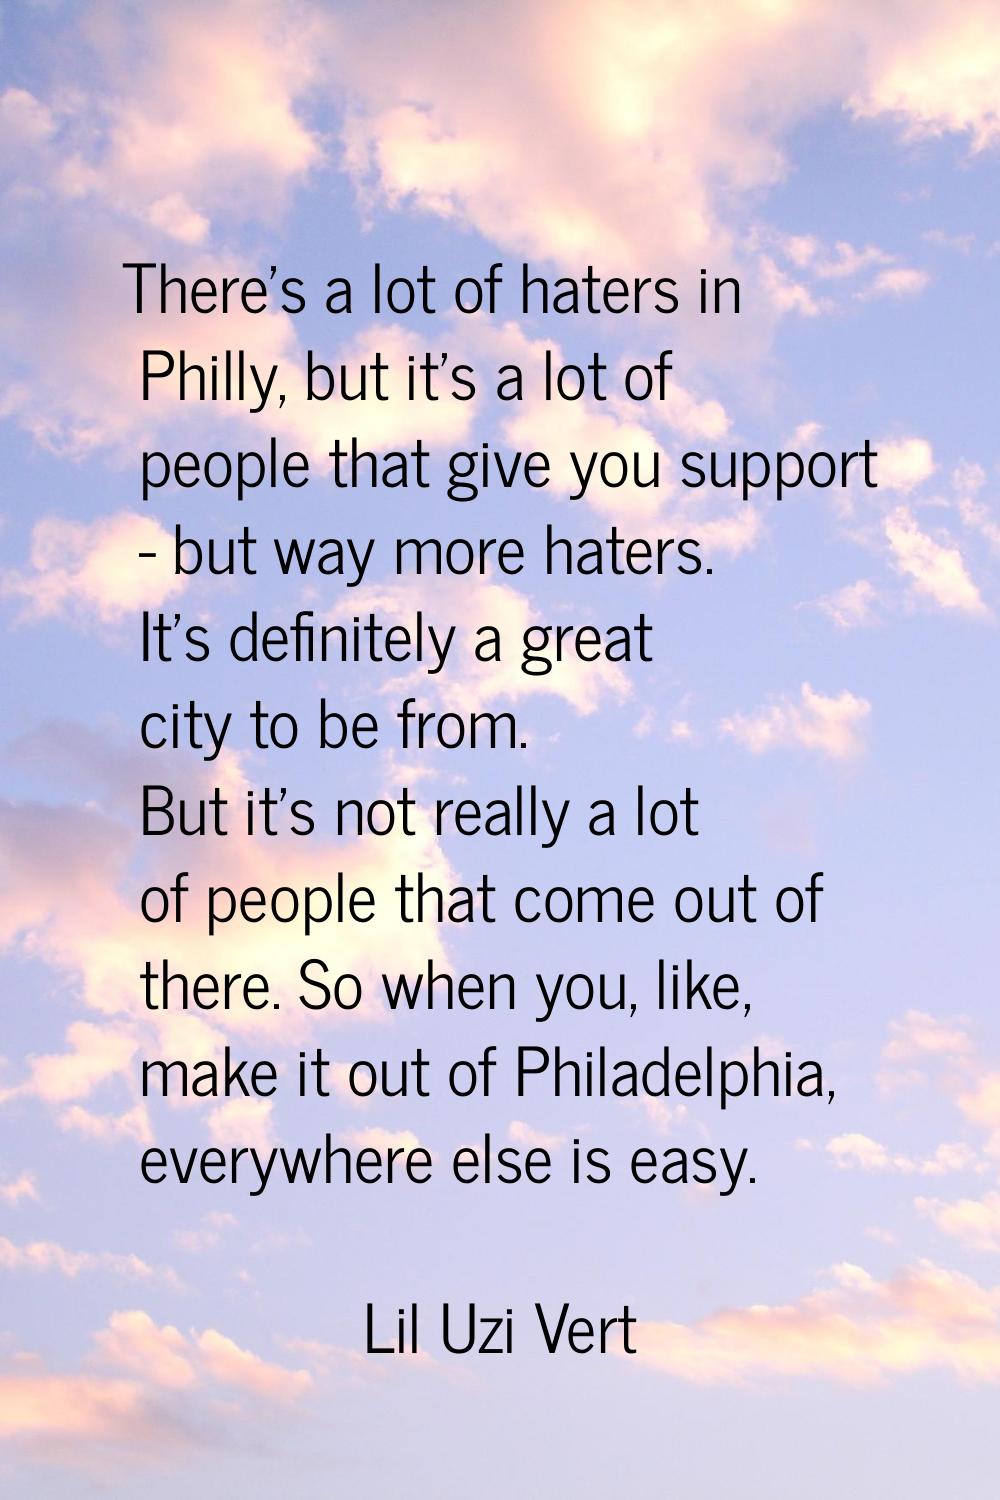 There's a lot of haters in Philly, but it's a lot of people that give you support - but way more ha